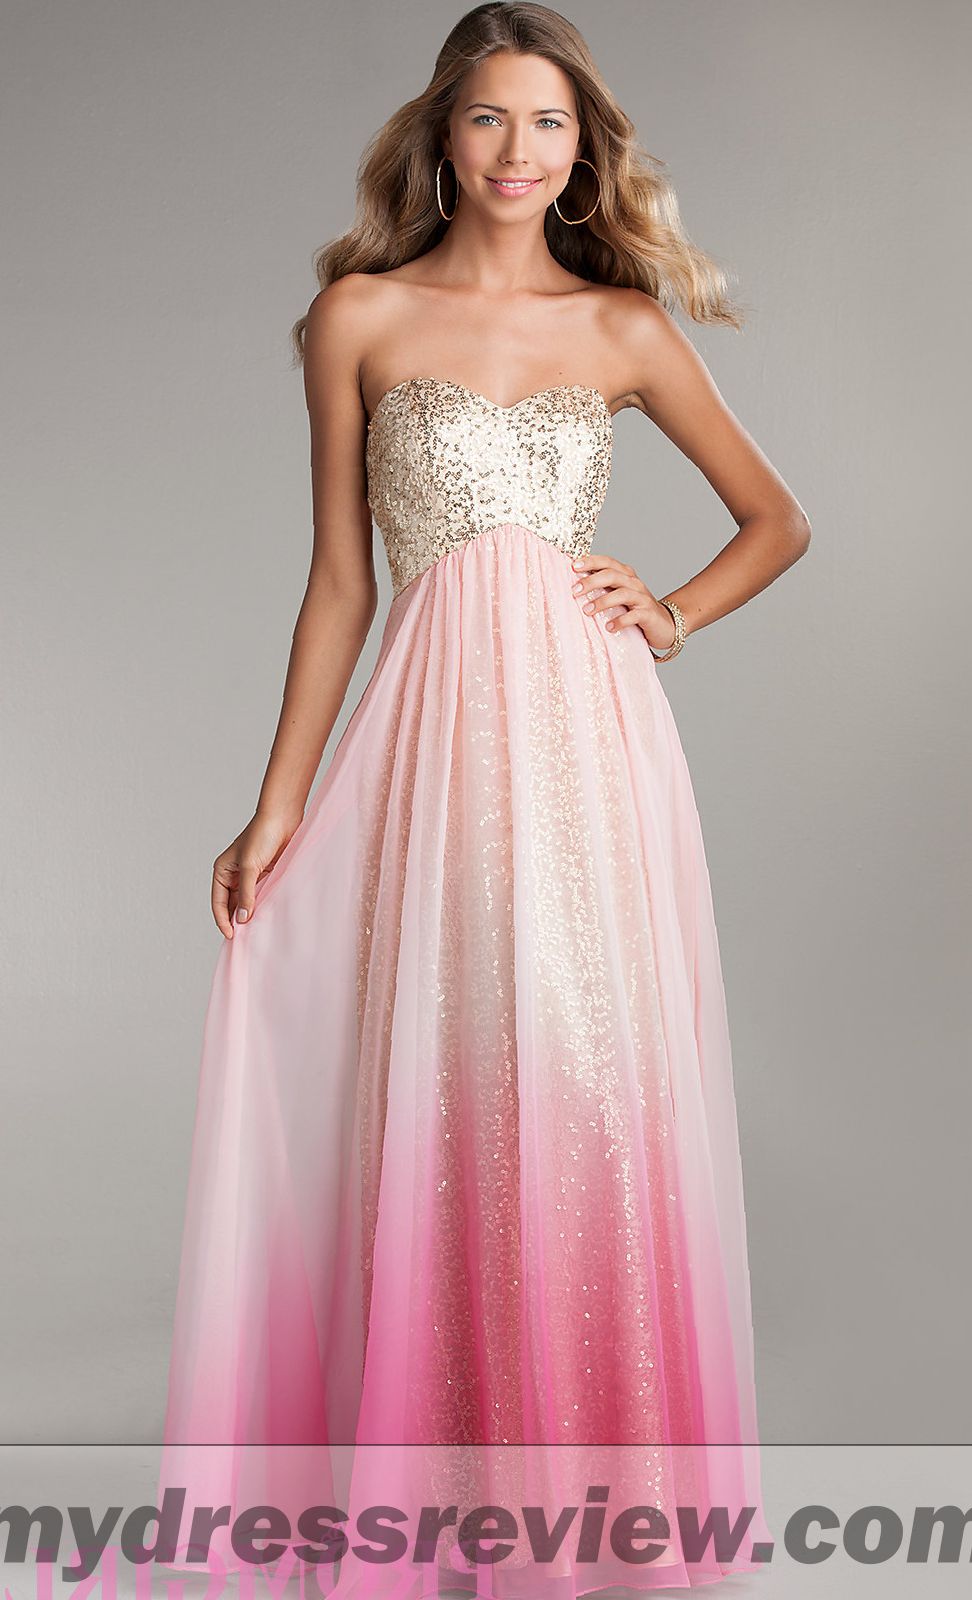 Pink Sequin Dress Long And Clothing Brand Reviews